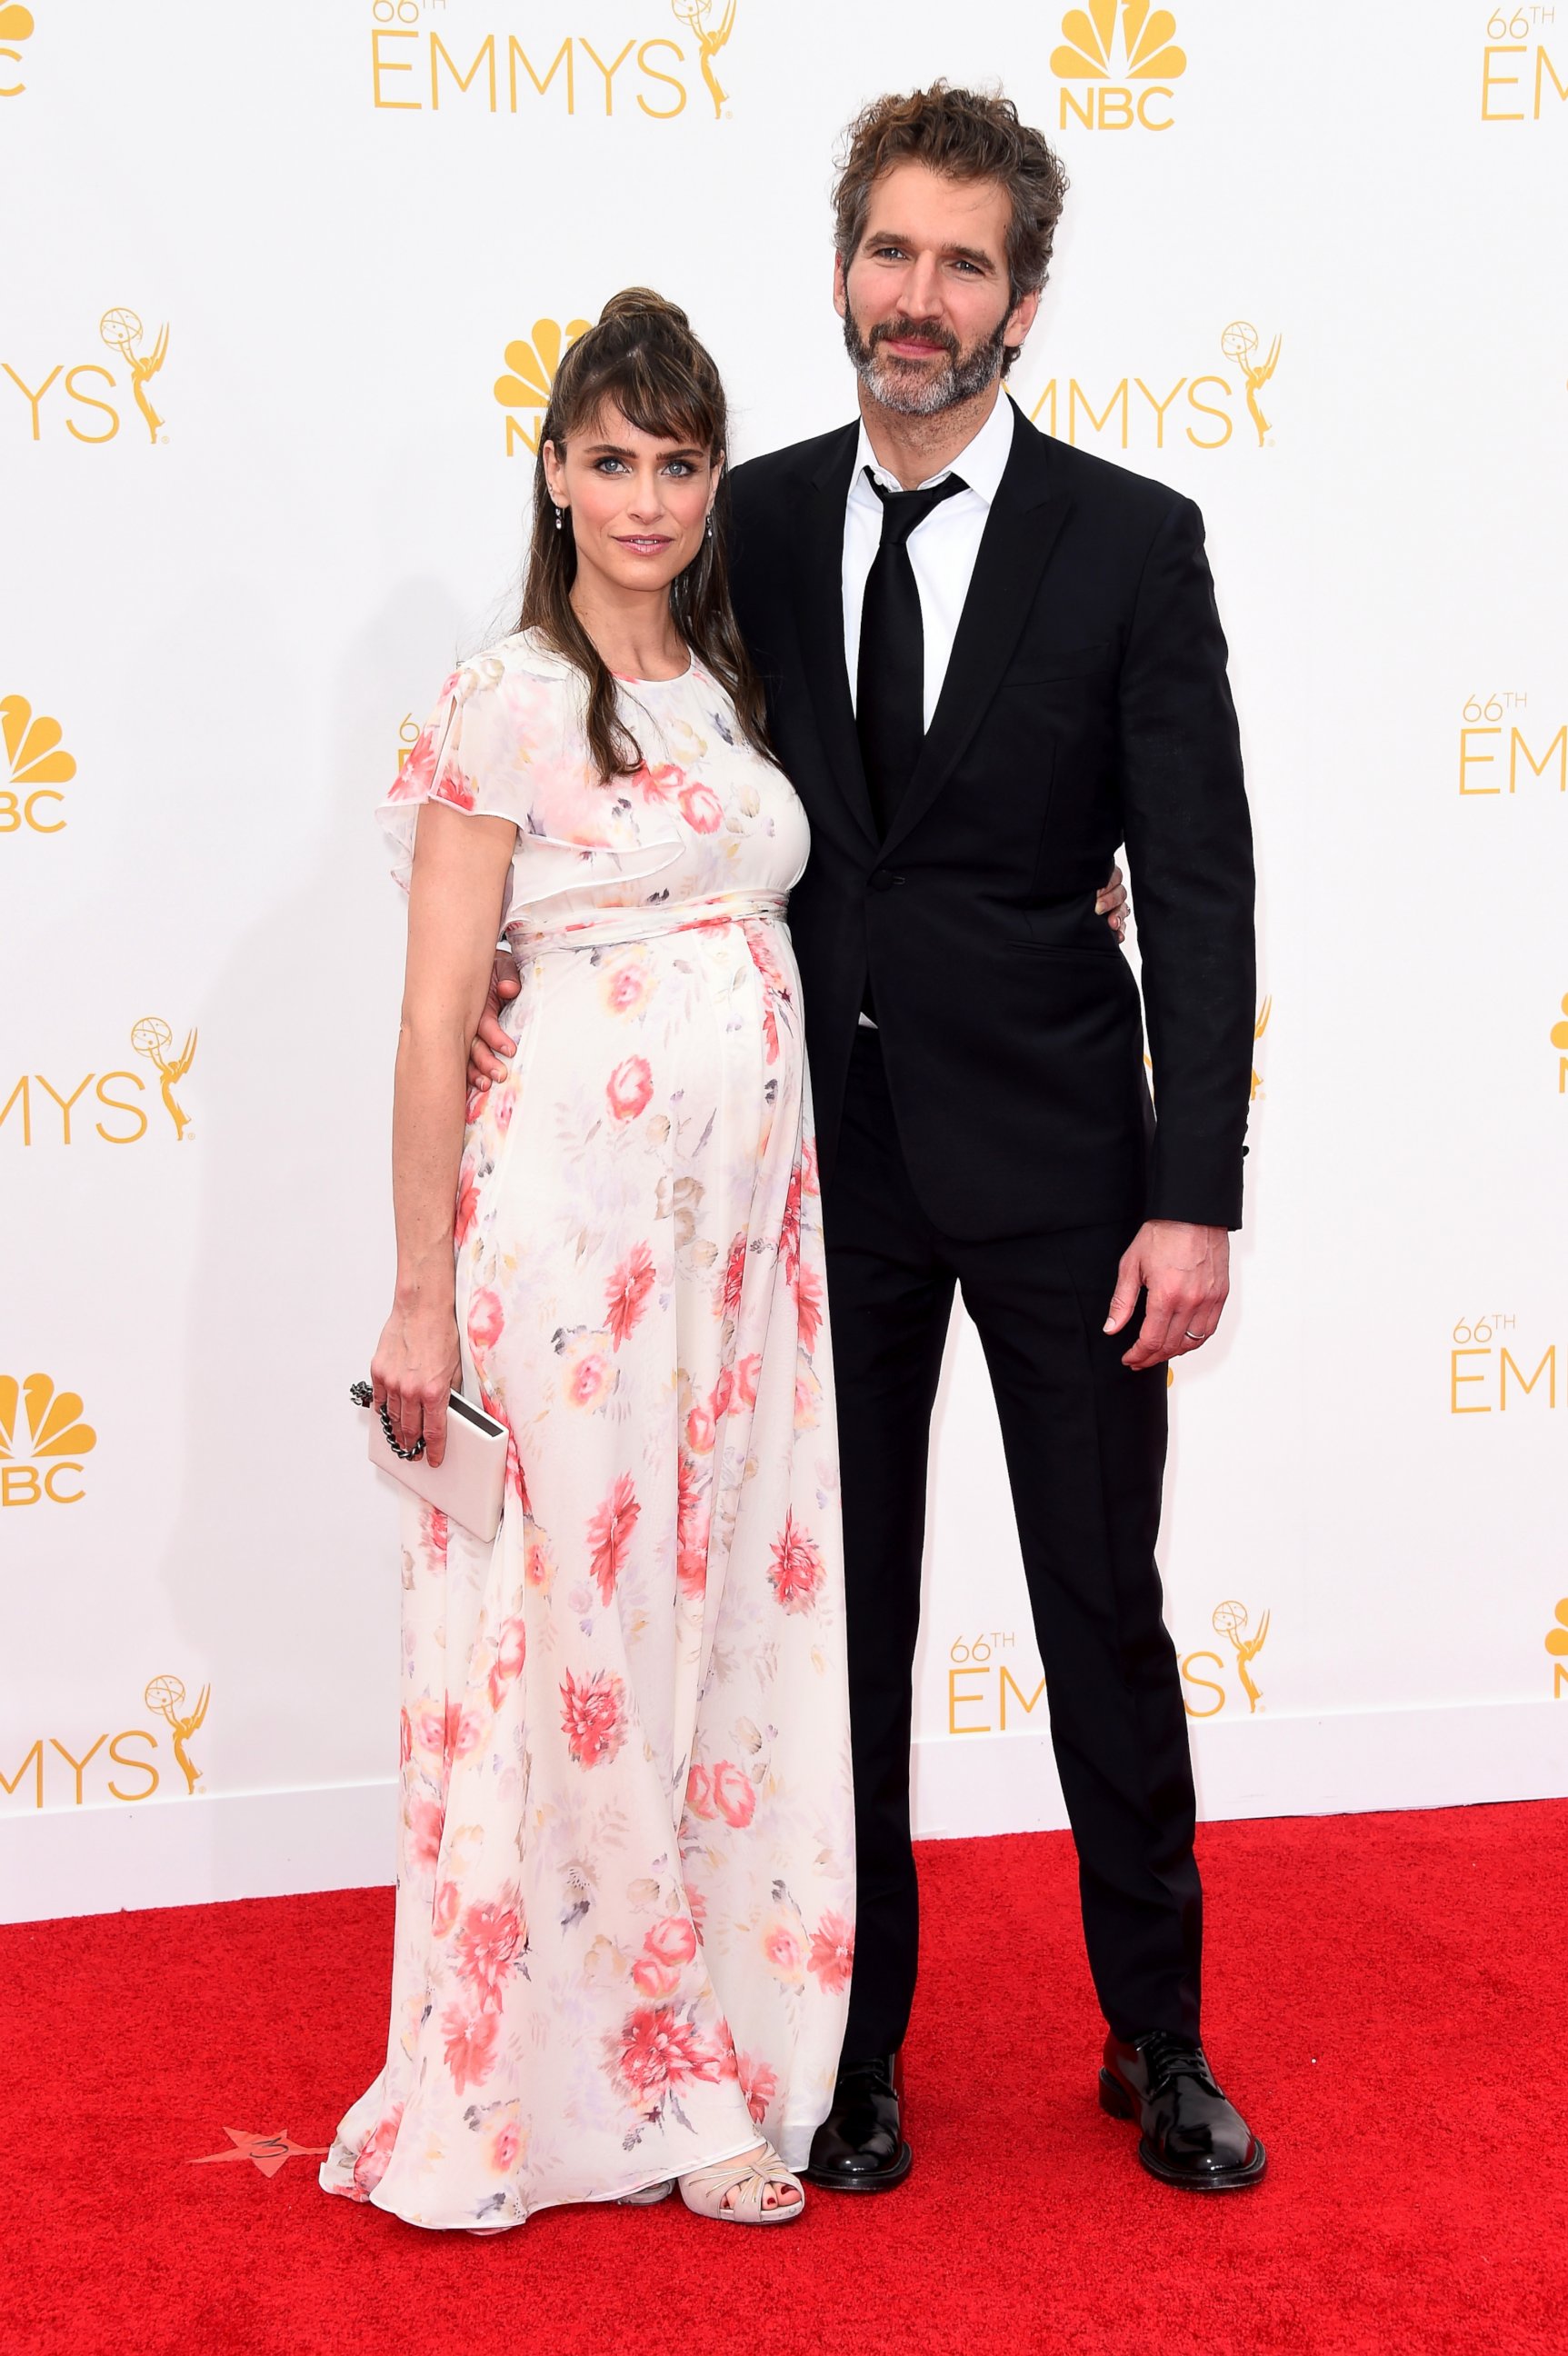 PHOTO: Amanda Peet and writer/director David Benioff attend the 66th Annual Primetime Emmy Awards held at Nokia Theatre L.A. Live, Aug. 25, 2014, in Los Angeles.